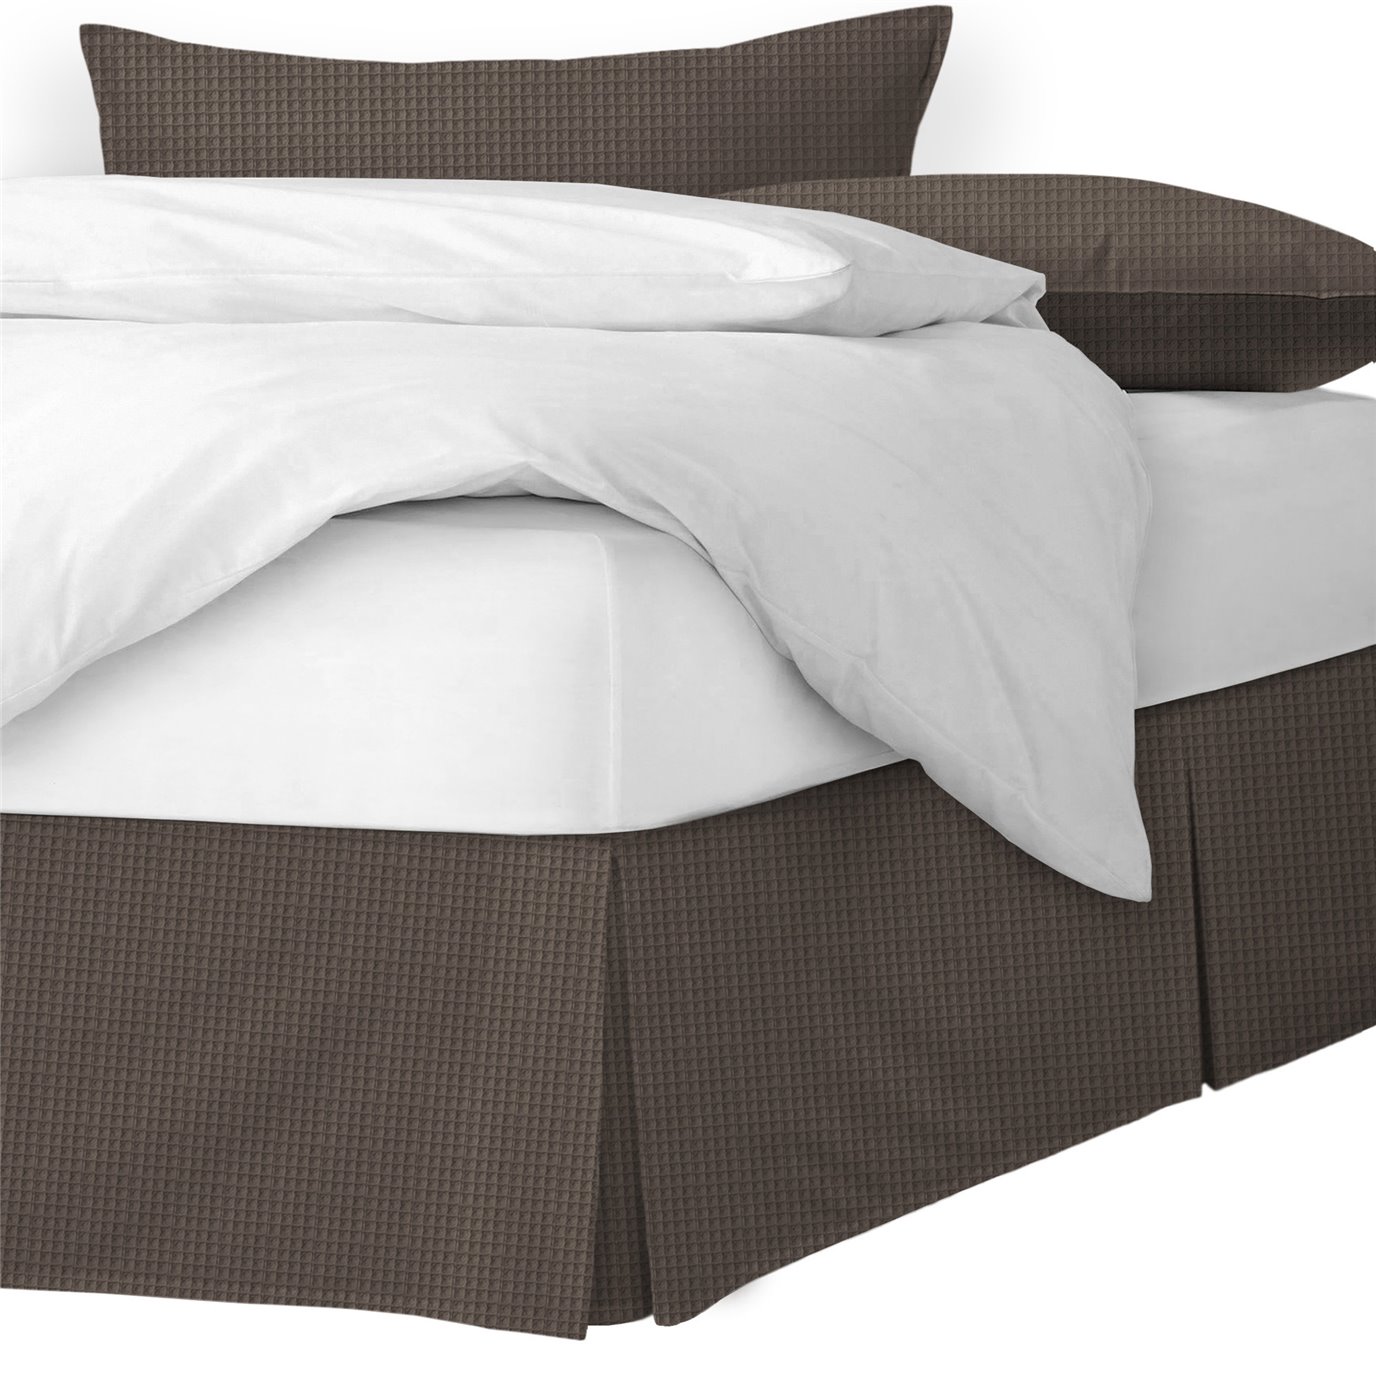 Classic Waffle Mocca Platform Bed Skirt - Size Queen 15" Drop